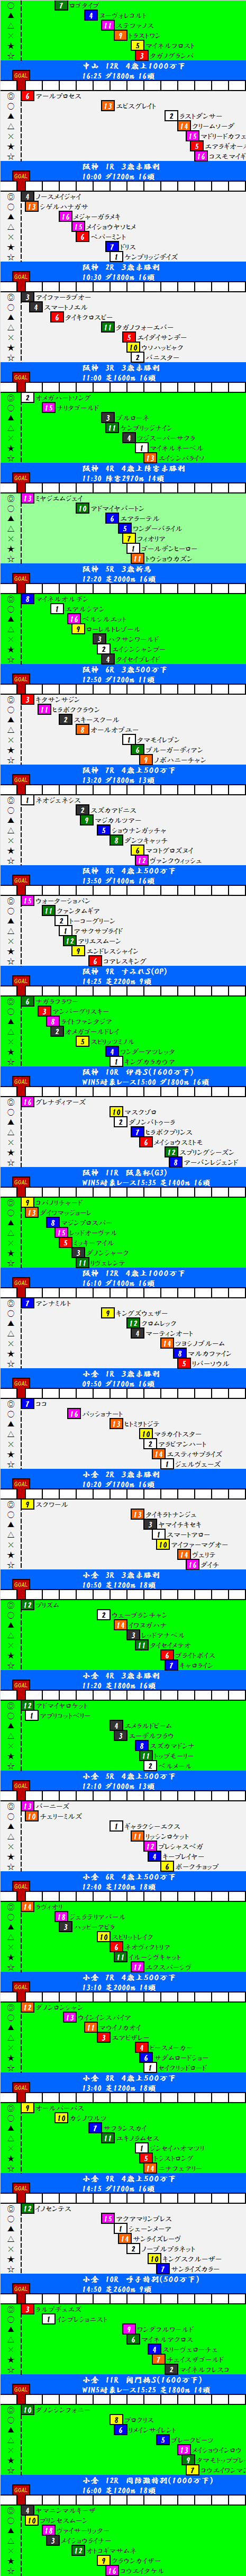 2015030102.png